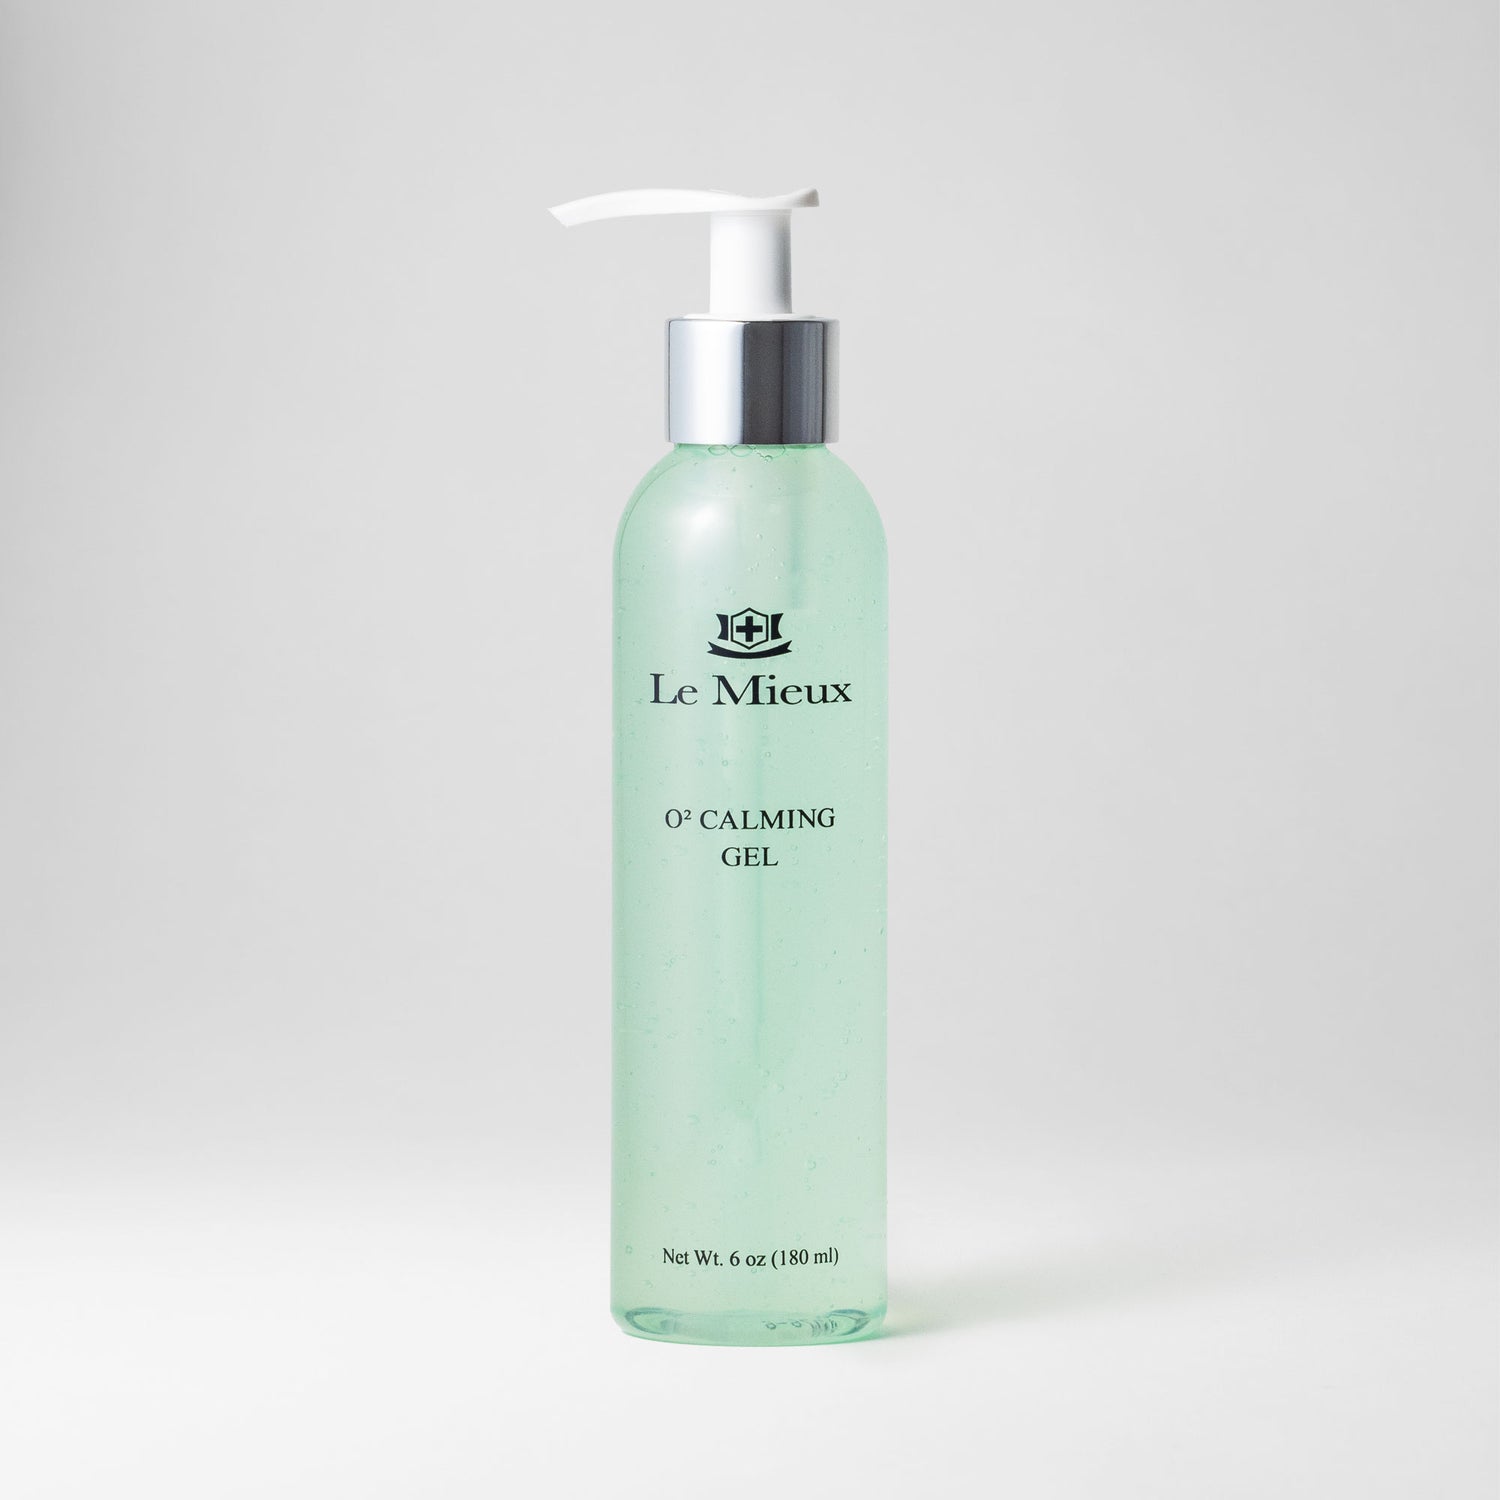  O² CALMING GEL from Le Mieux Skincare - featured